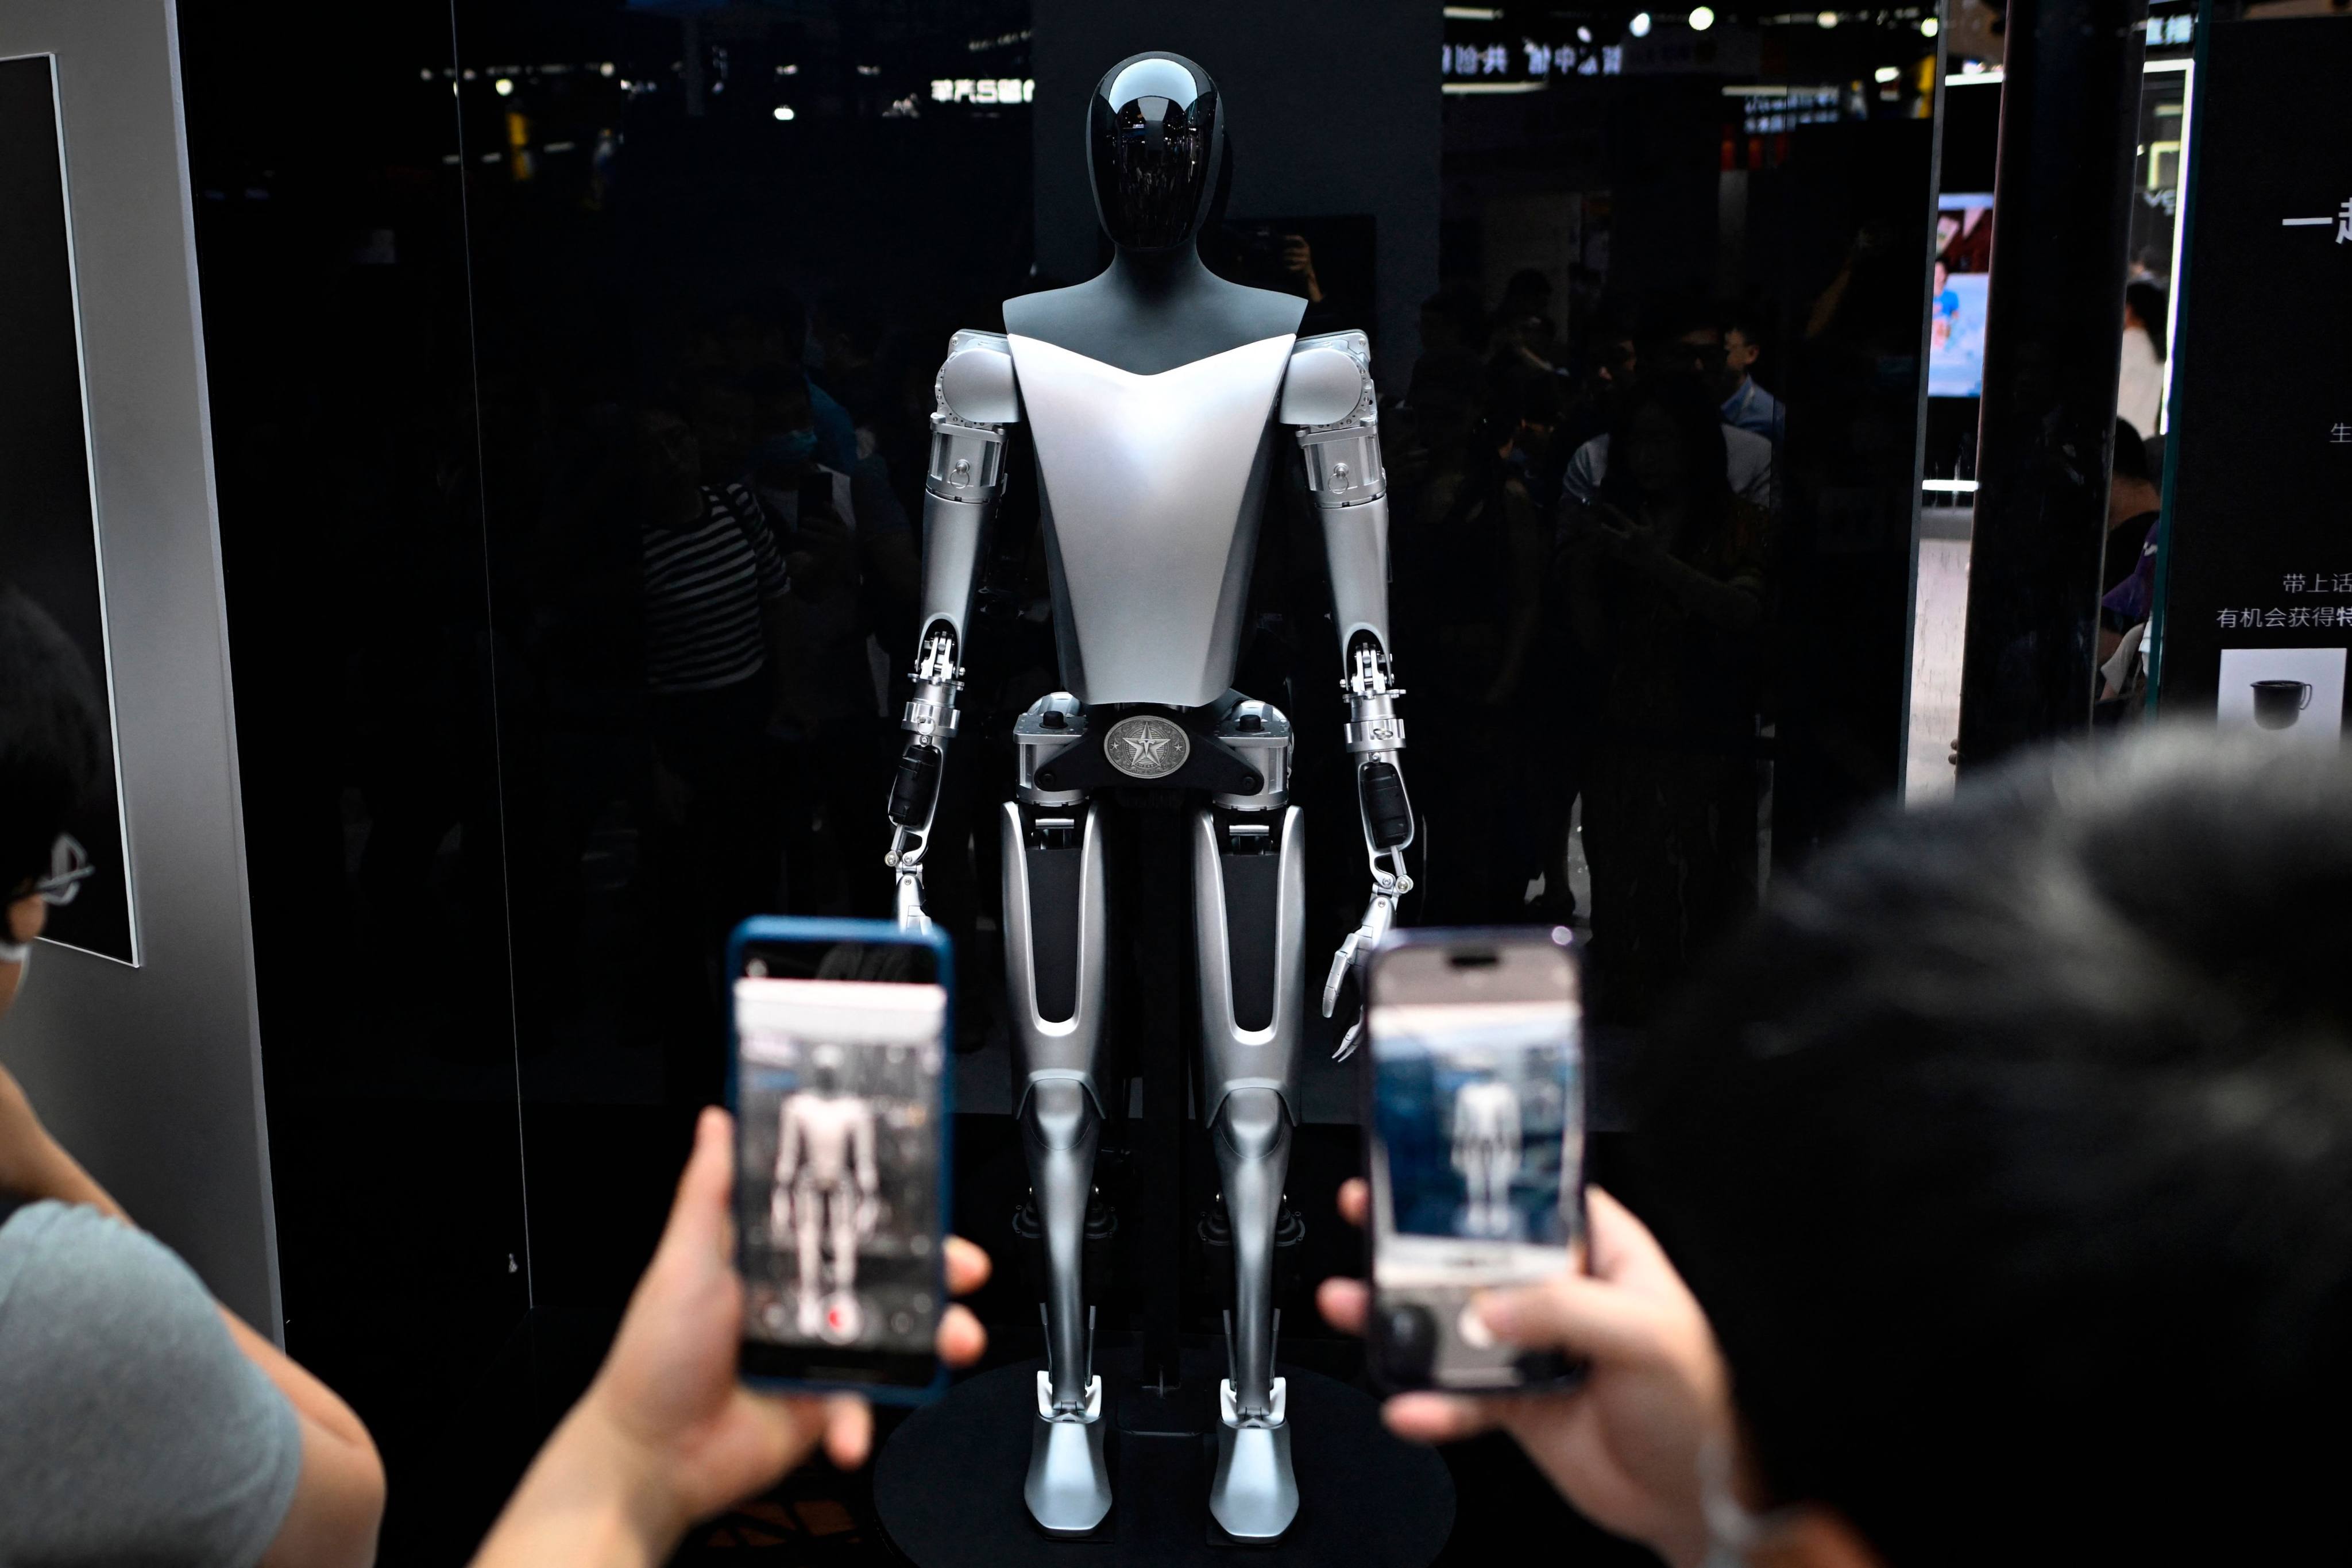 Visitors take photos of a Tesla robot displayed at the World Artificial Intelligence Conference (WAIC) in Shanghai on July 6, 2023. Photo: AFP